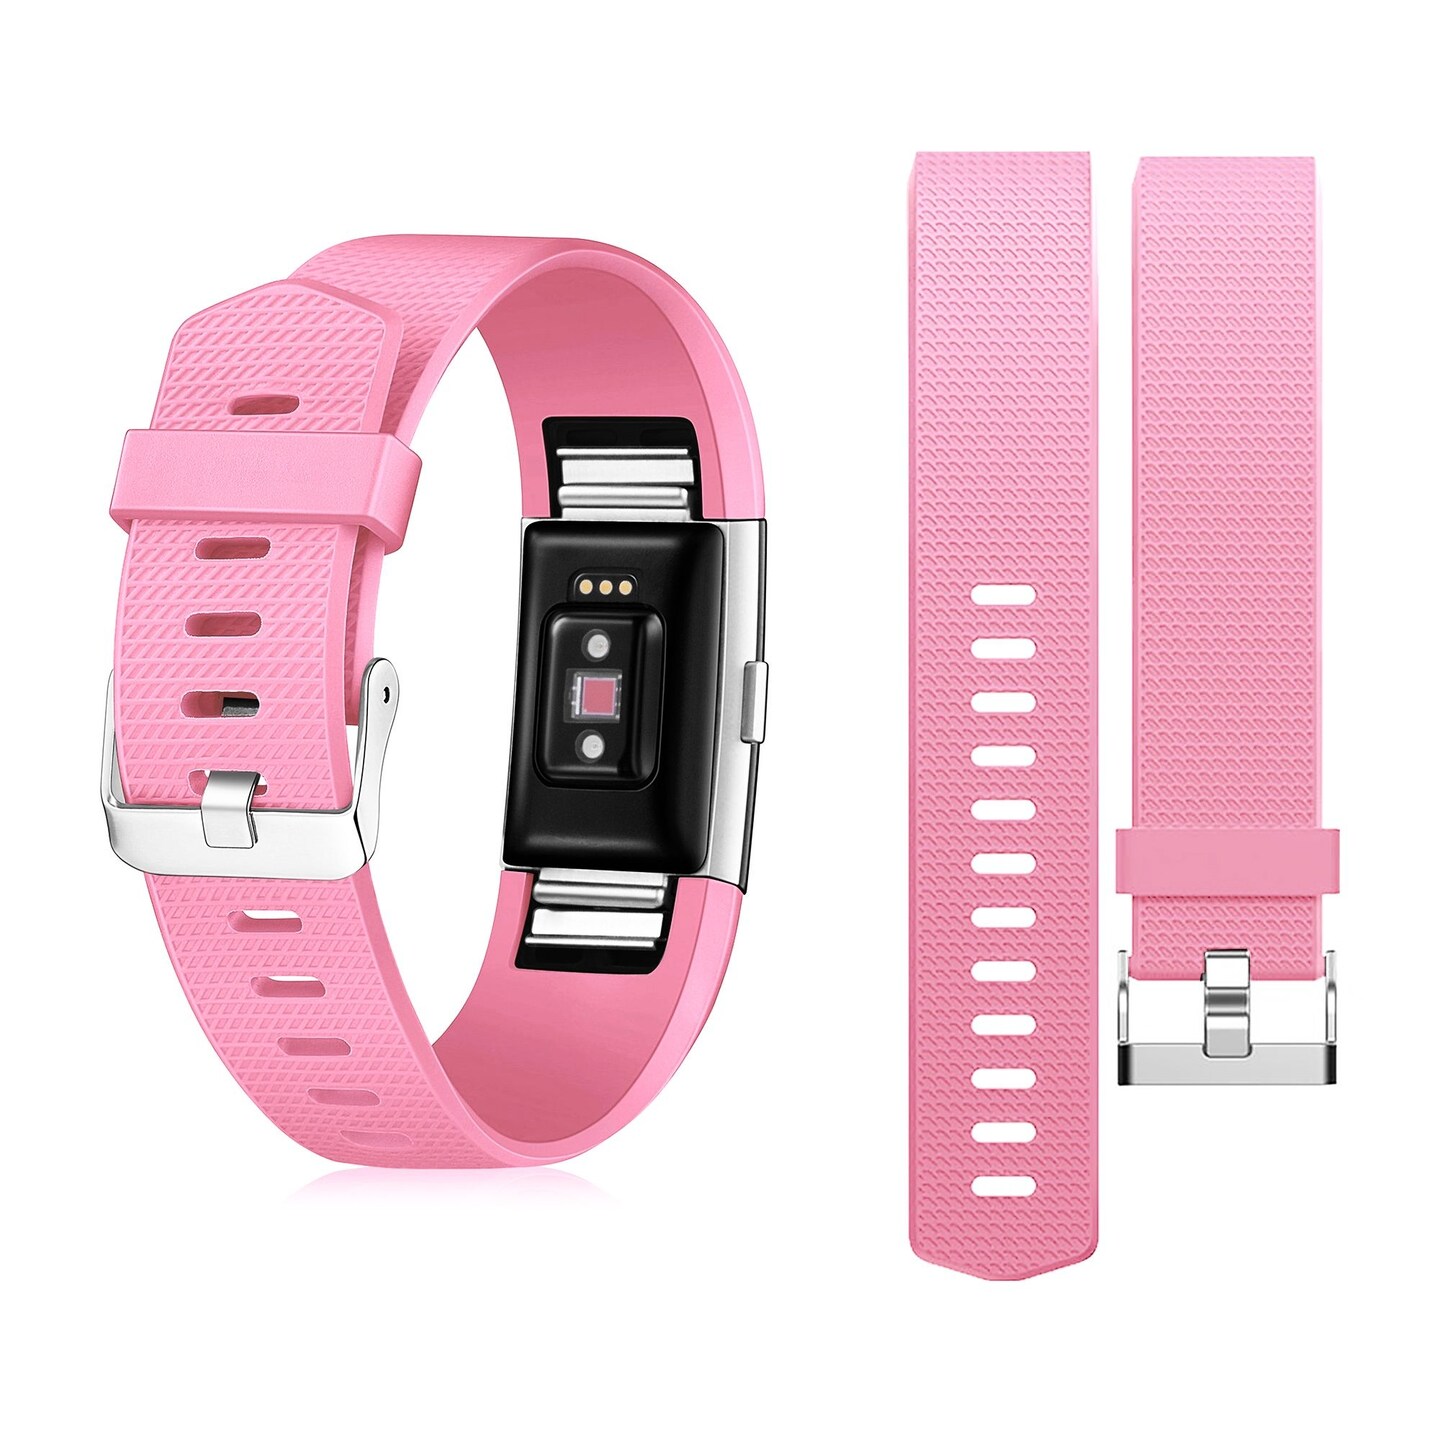 Zodaca for Fitbit Charge 2 Band , Replacement Wristband Soft Silicone Rubber Fashion Sport Strap with Adjustable Watchband-style Buckle for Fitbit Charge 2 Fitness Tracker Accessories Light Pink